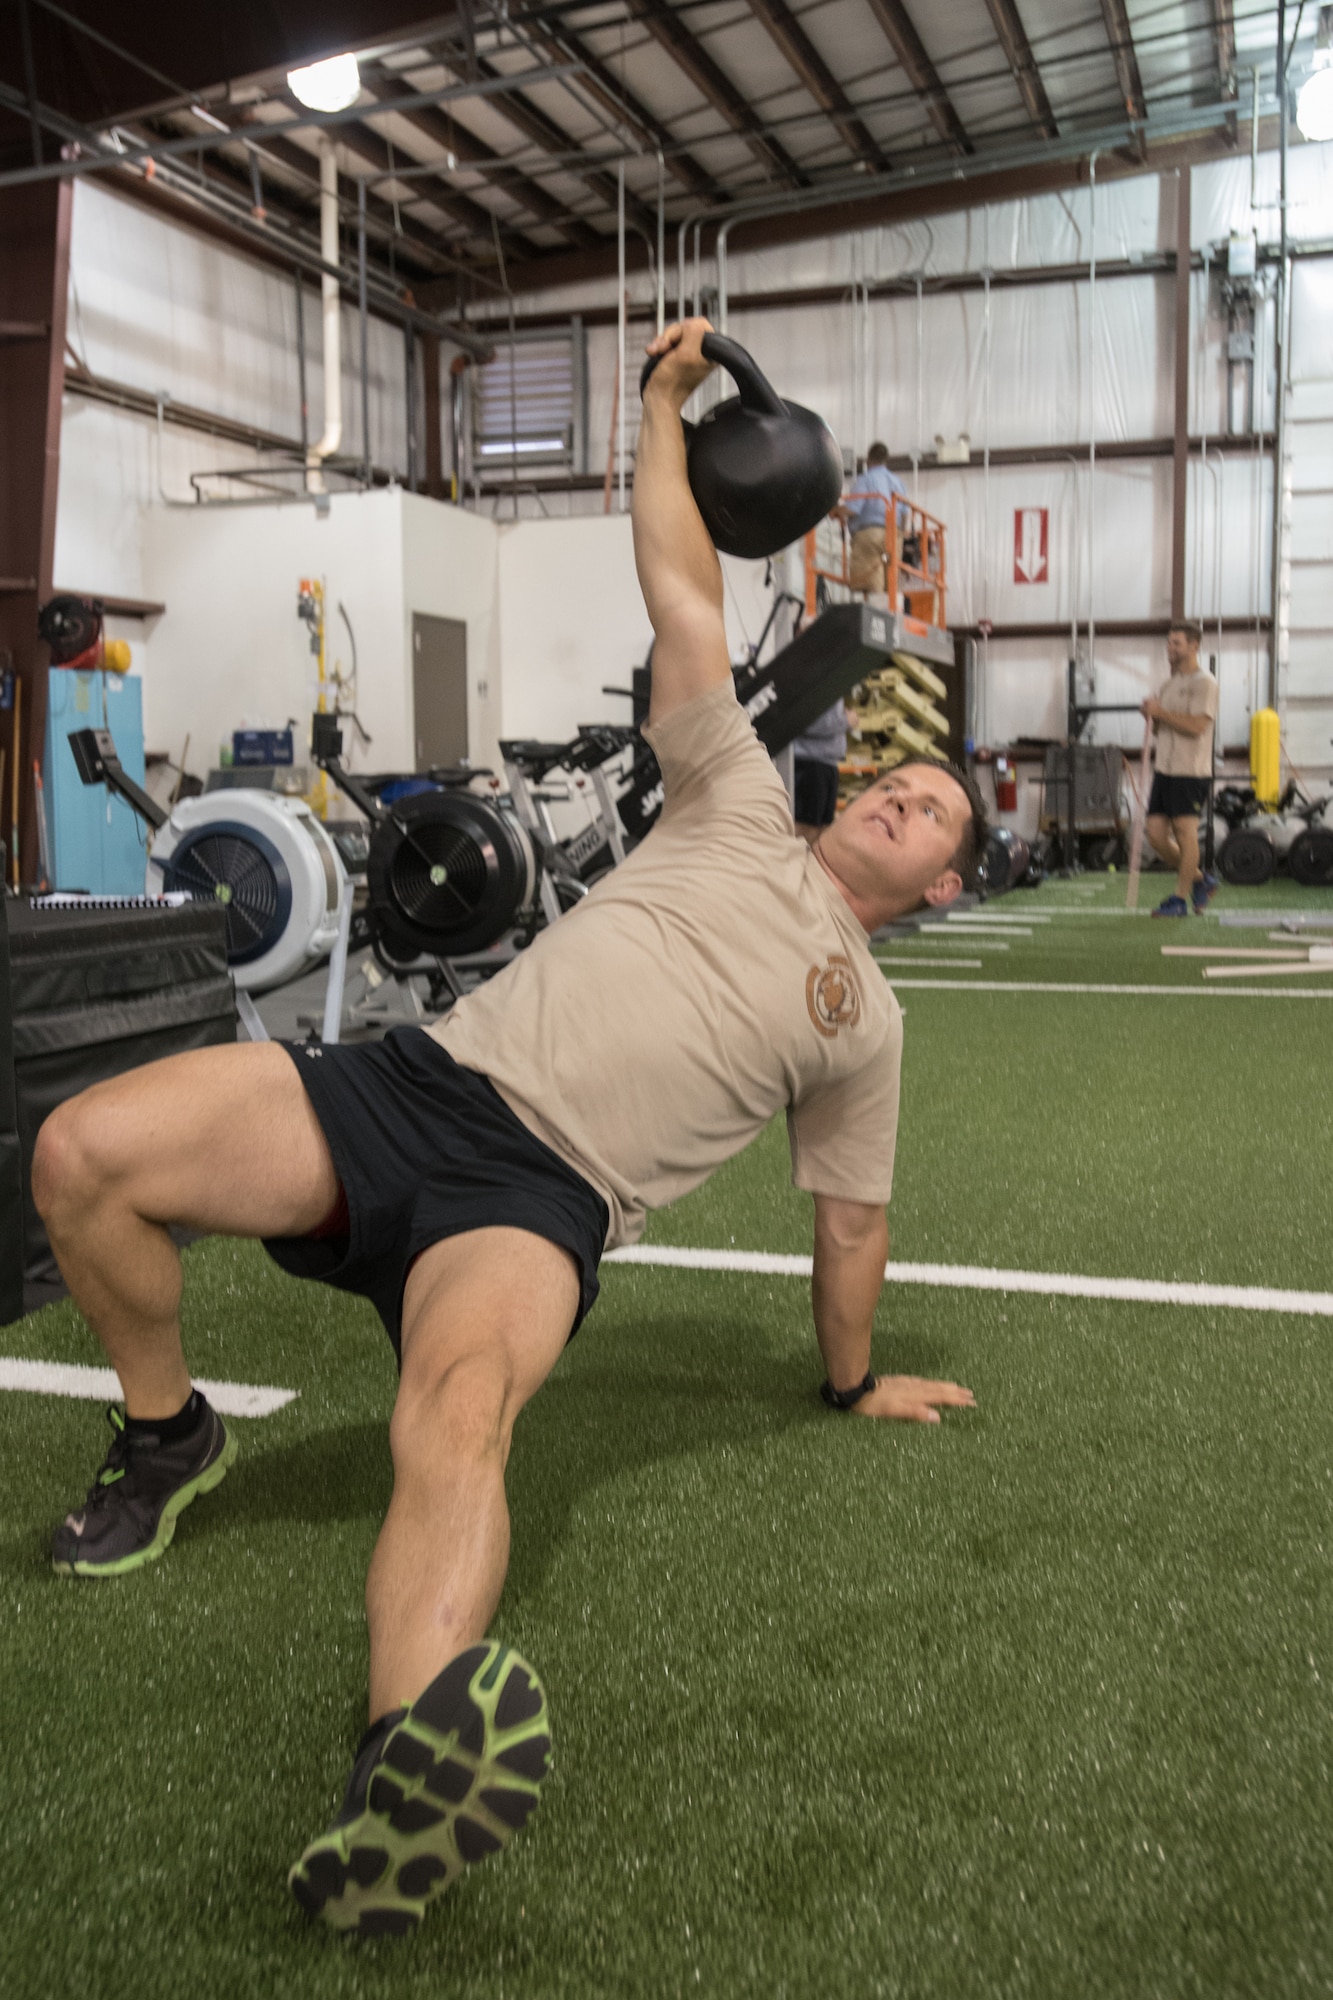 Master Sgt. Harley Bobay, a special tactics operator for the 123rd Special Tactics Squadron, works through an individualized conditioning and maintenance program designed for him by the staff of the squadron’s Human Performance Program at the Kentucky Air National Guard Base in Louisville, Ky., Oct. 14, 2016. The focus of the program is to improve the operational longevity of special operators and reduce injuries in the field. (U.S. Air National Guard photo by Tech. Sgt. Vicky Spesard)
